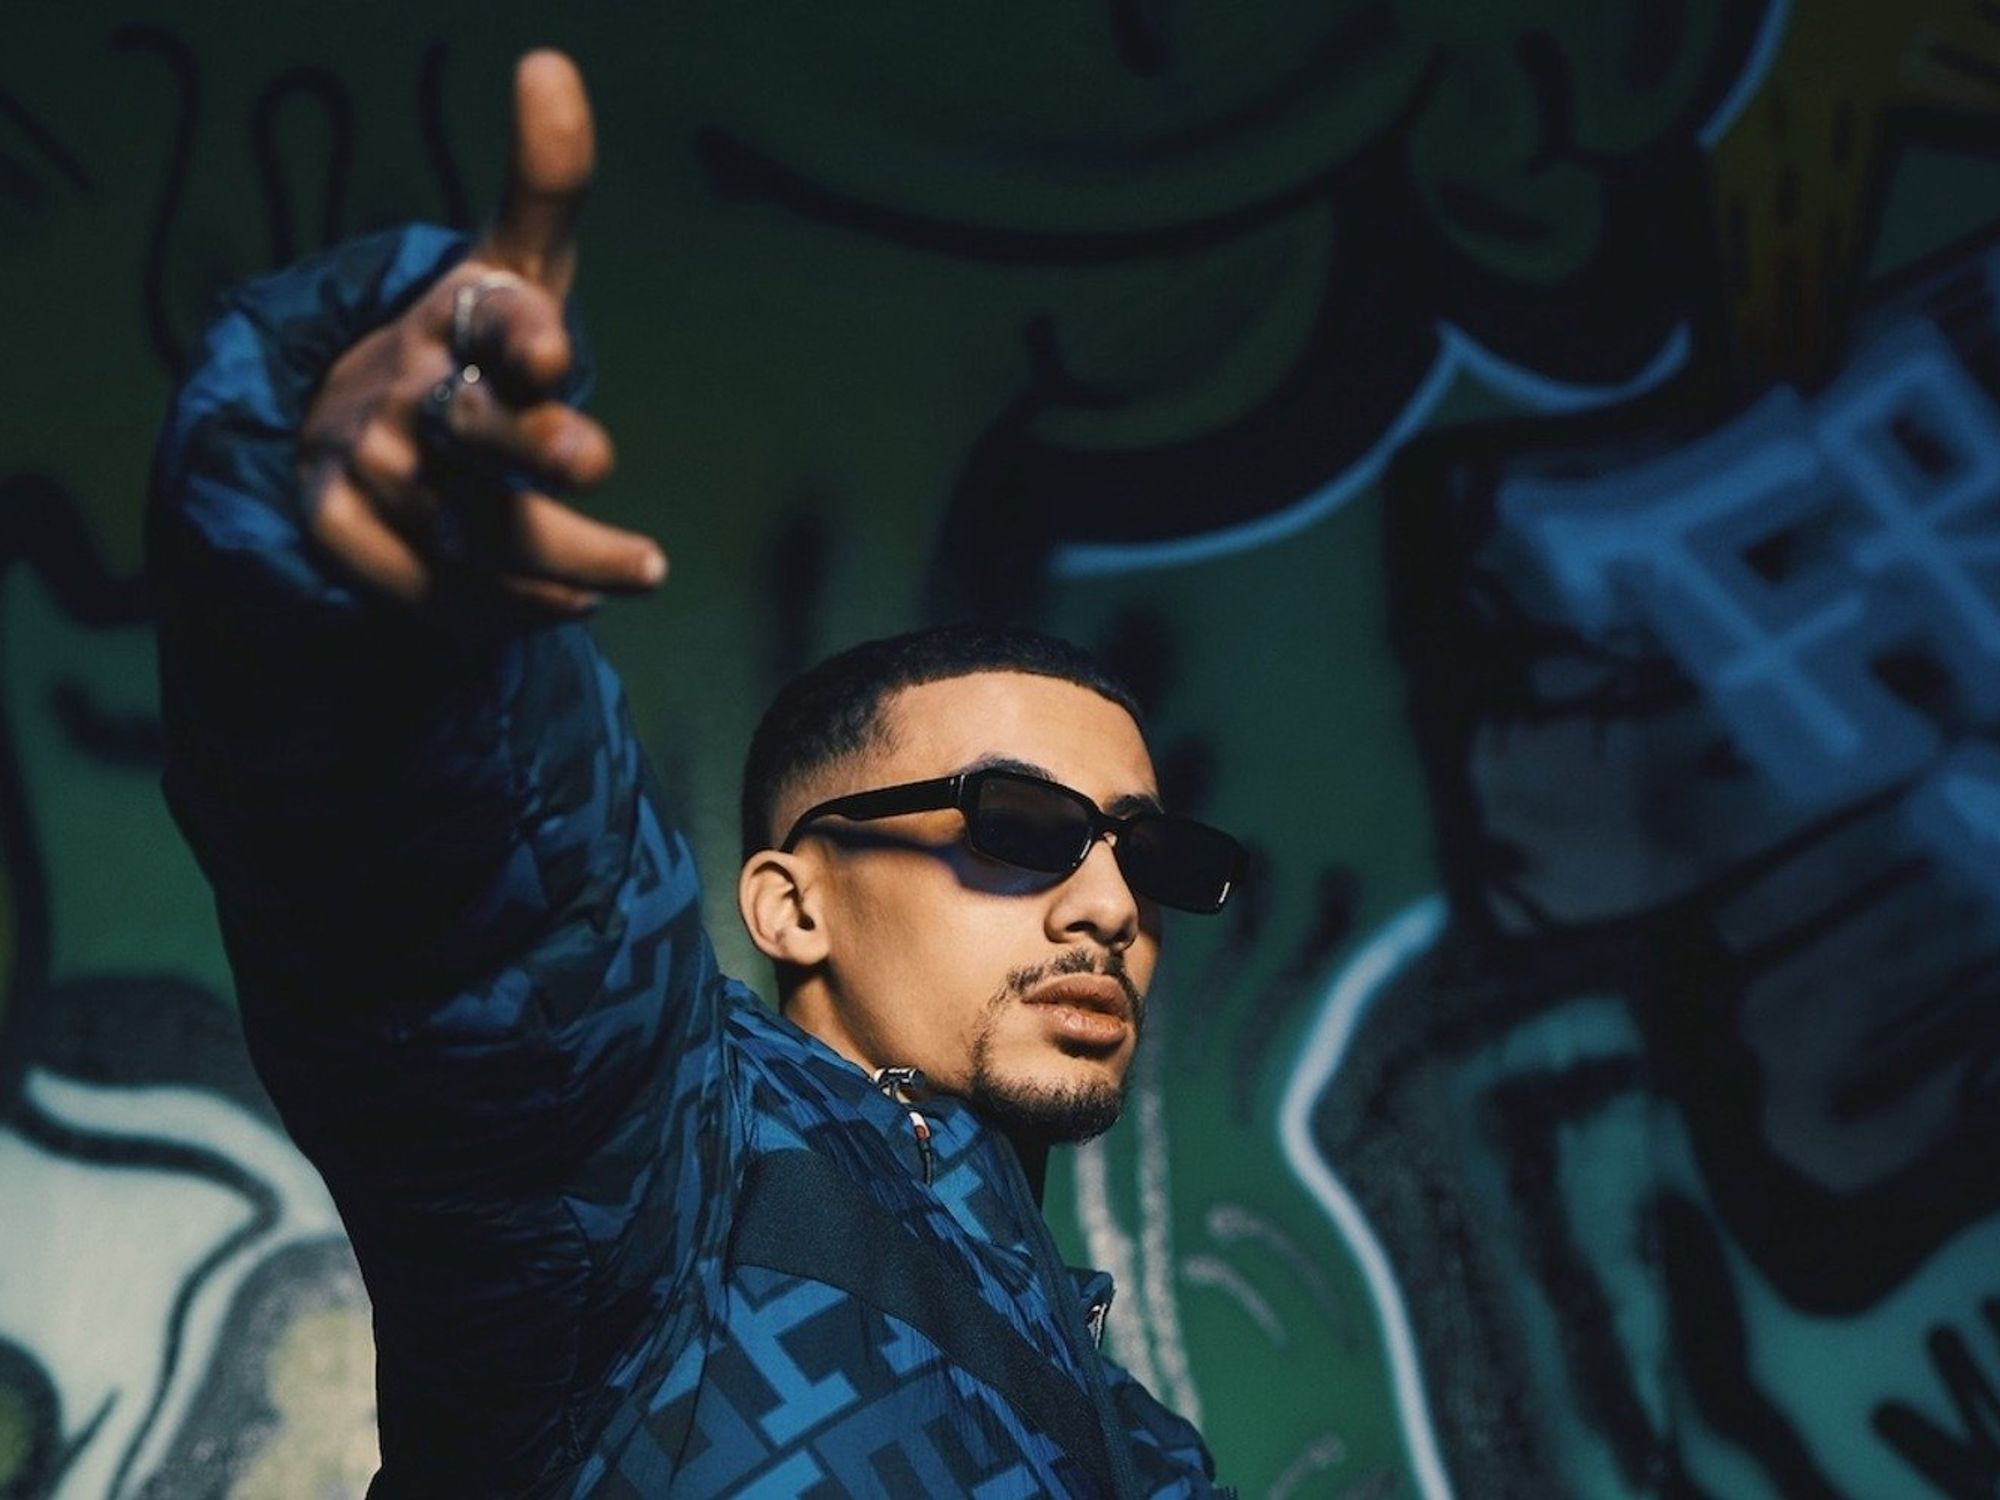 Egyptian rapper FL EX poses and points to the camera  in sunglasses